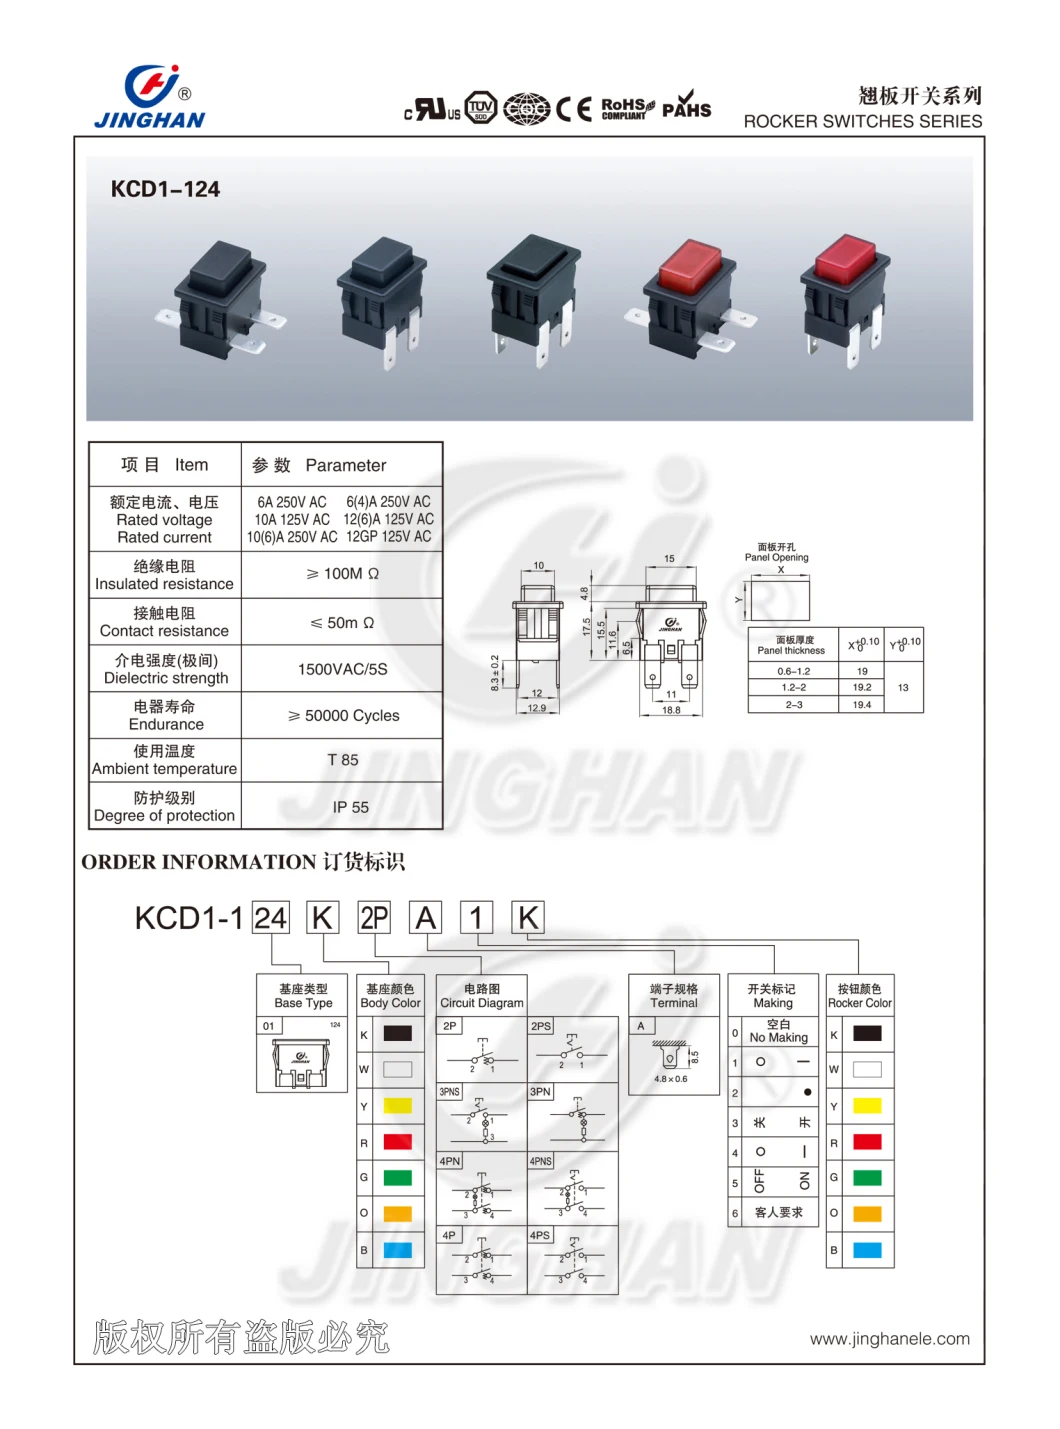 Spst/Spdt Momentary/Latching Illuminated Rectangular Push Button Switch for Oven, Coffee Maker, Kitchenwares